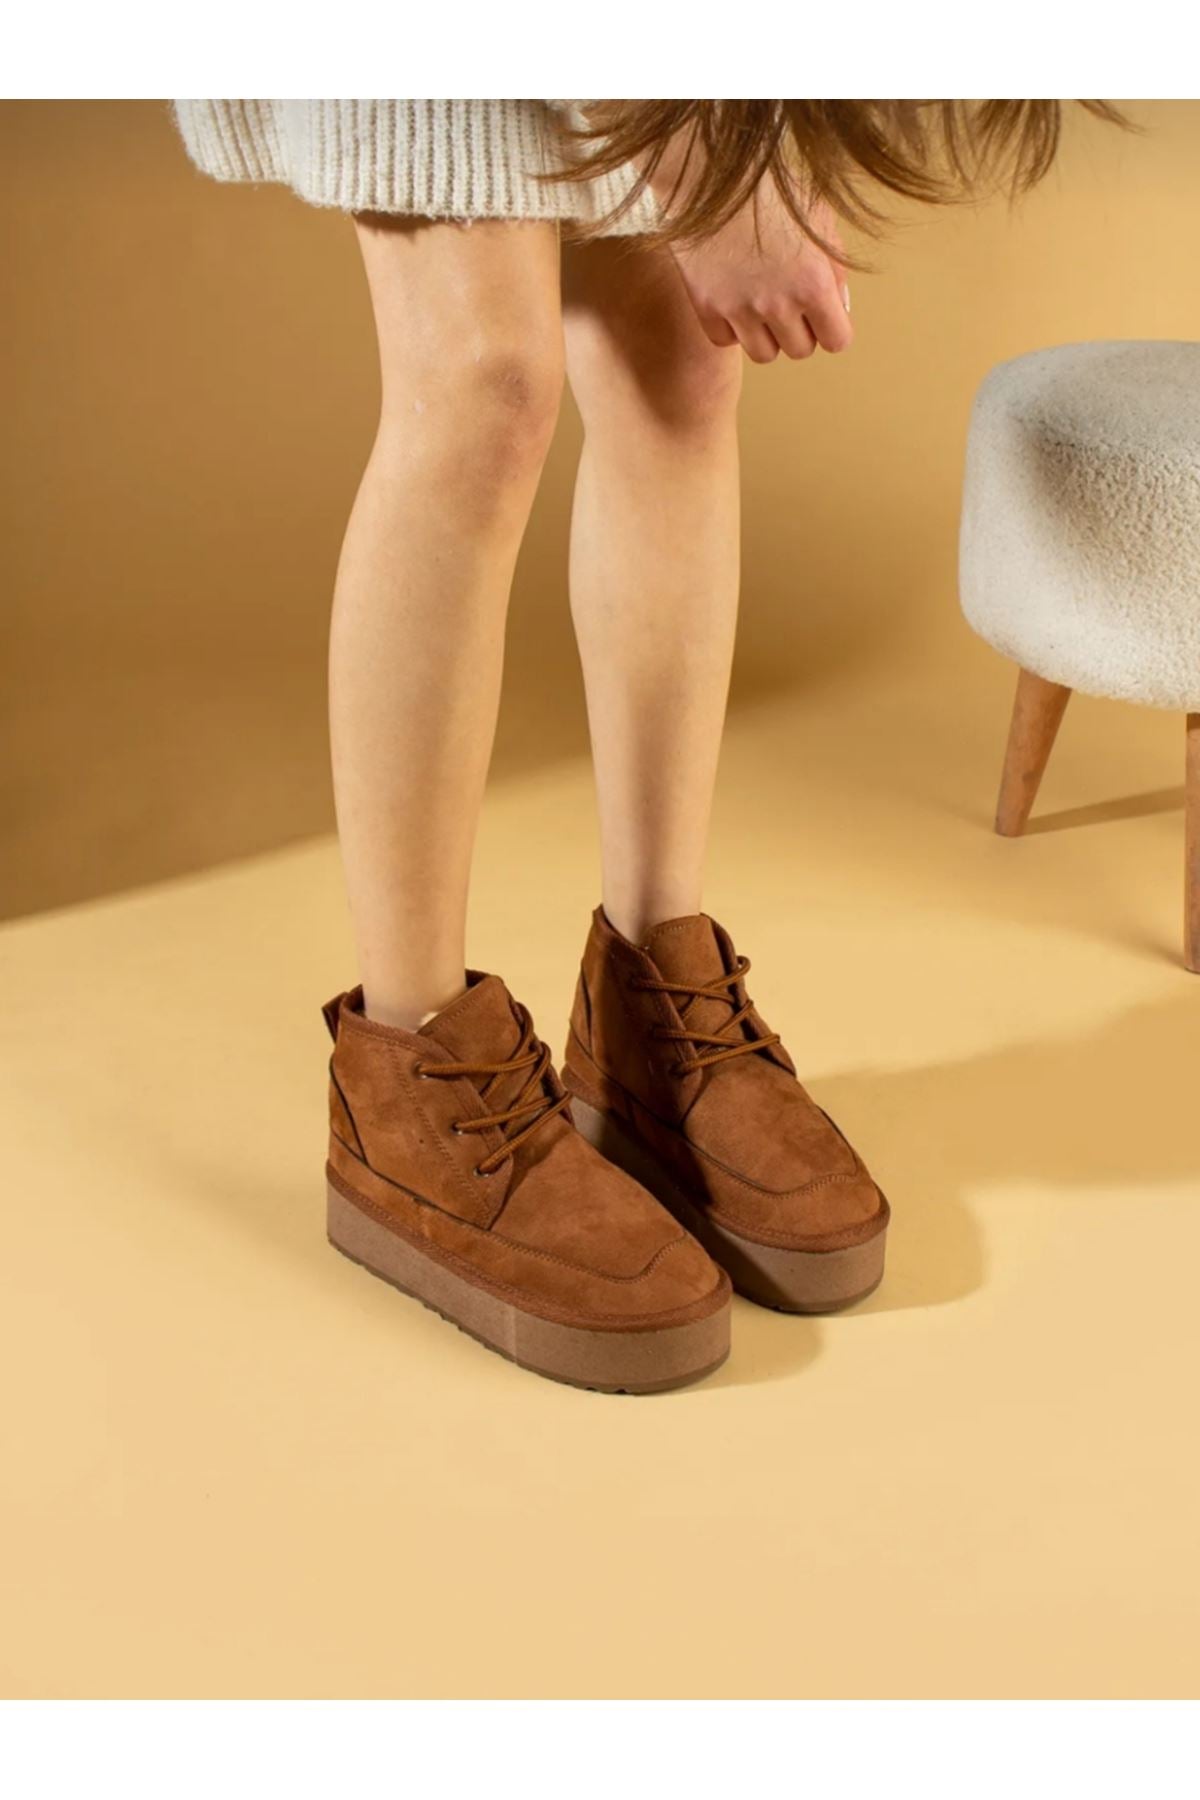 Sesil tan suede lace-up women's boots - STREETMODE™